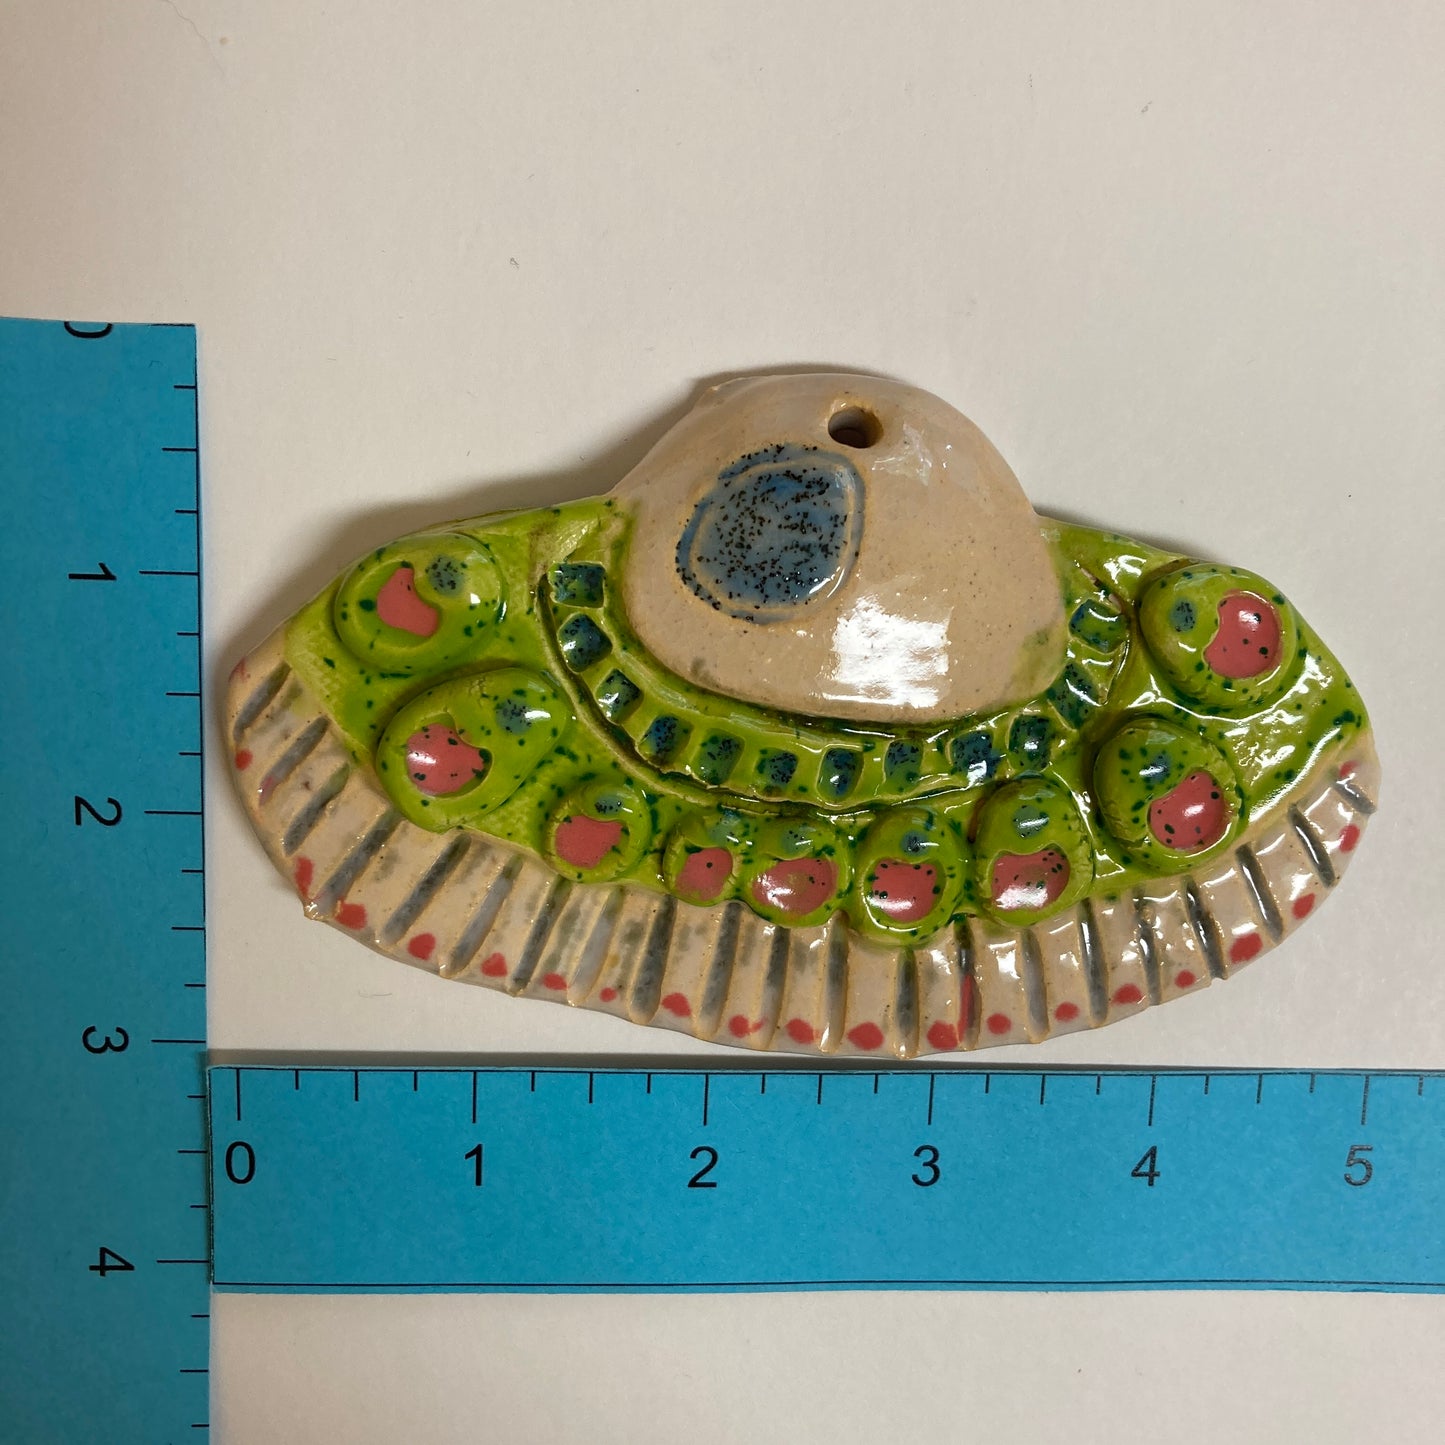 WATCH Resources Art Guild - Ceramic Arts Handmade Clay Crafts Glazed Space Ship 5-inch x 3-inch by Lisa Uptain